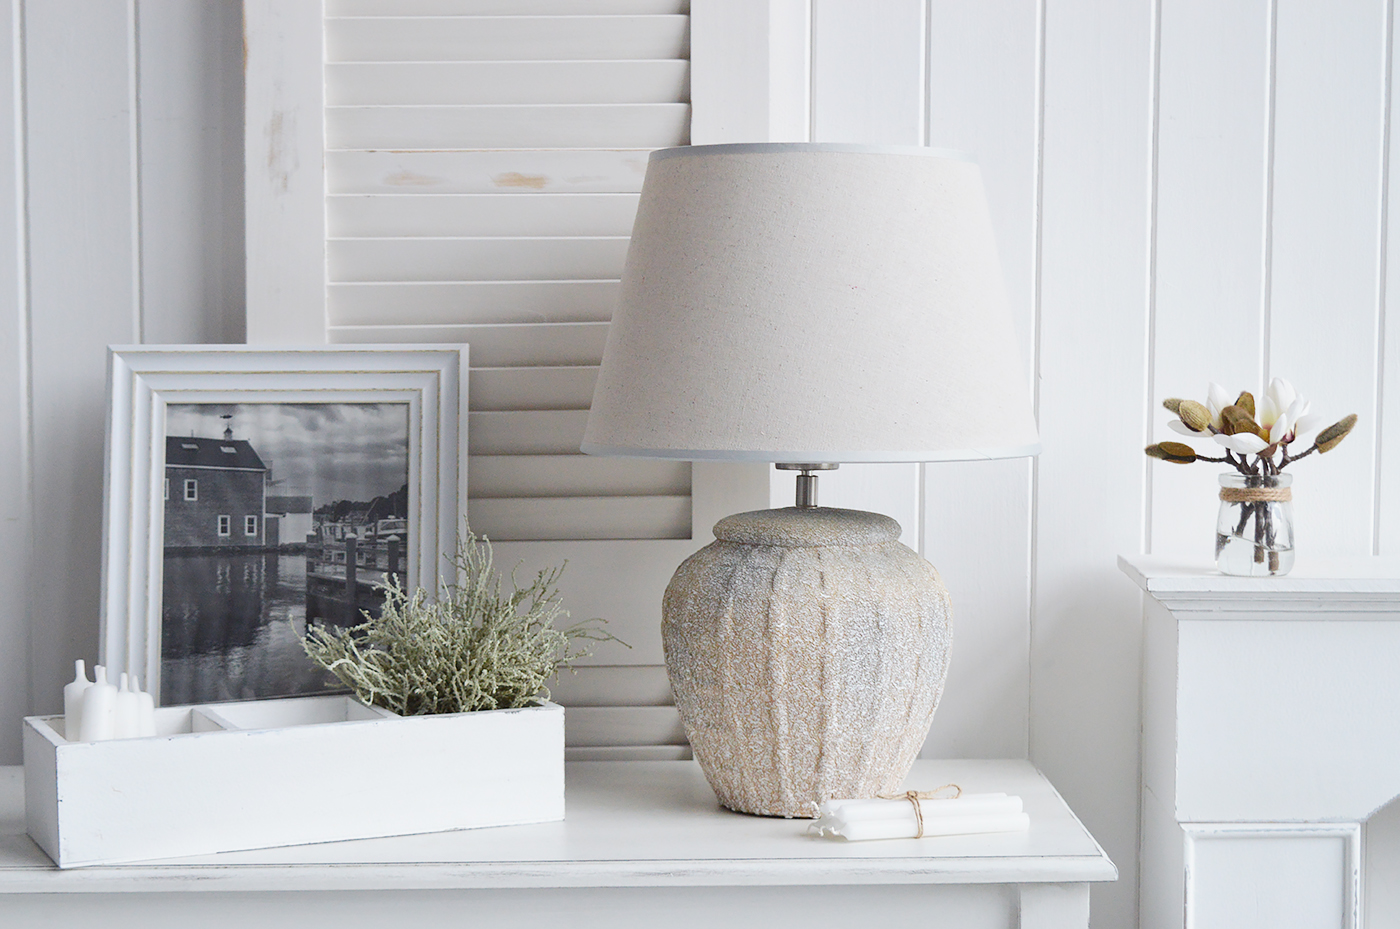 The Ludlow lamp - New England Style table stone lamps to complement country, coastal and city furniture and home interiors from The White Lighthouse Furniture